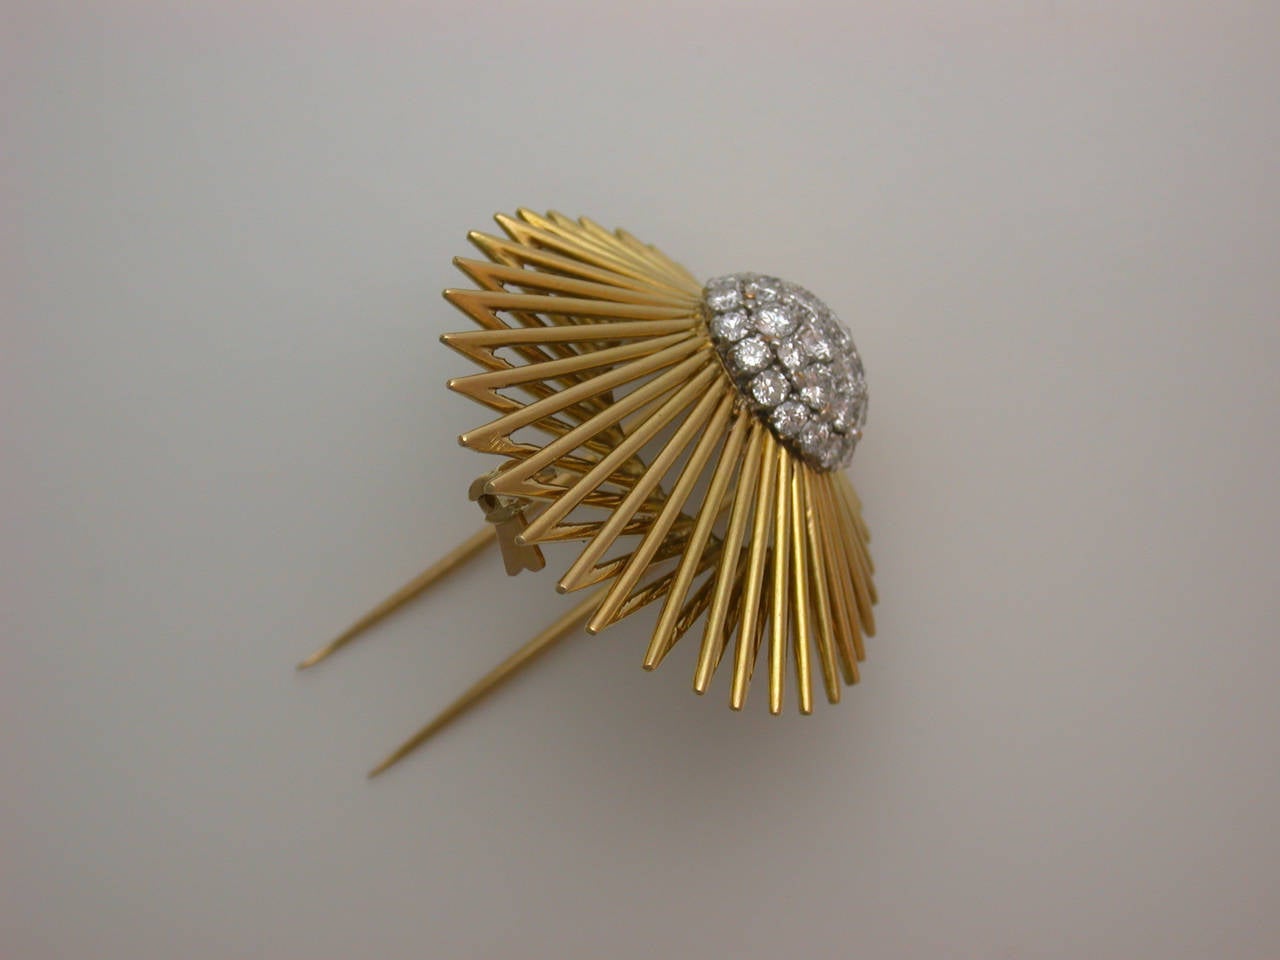 The brooch featuring a platinum and diamond domed element (set with 36 white circular-cut diamonds weighing approximately 2.20 carats total) trailing a dramatic sweep of polished yellow gold rays like a meteor shooting across the sky, signed Van